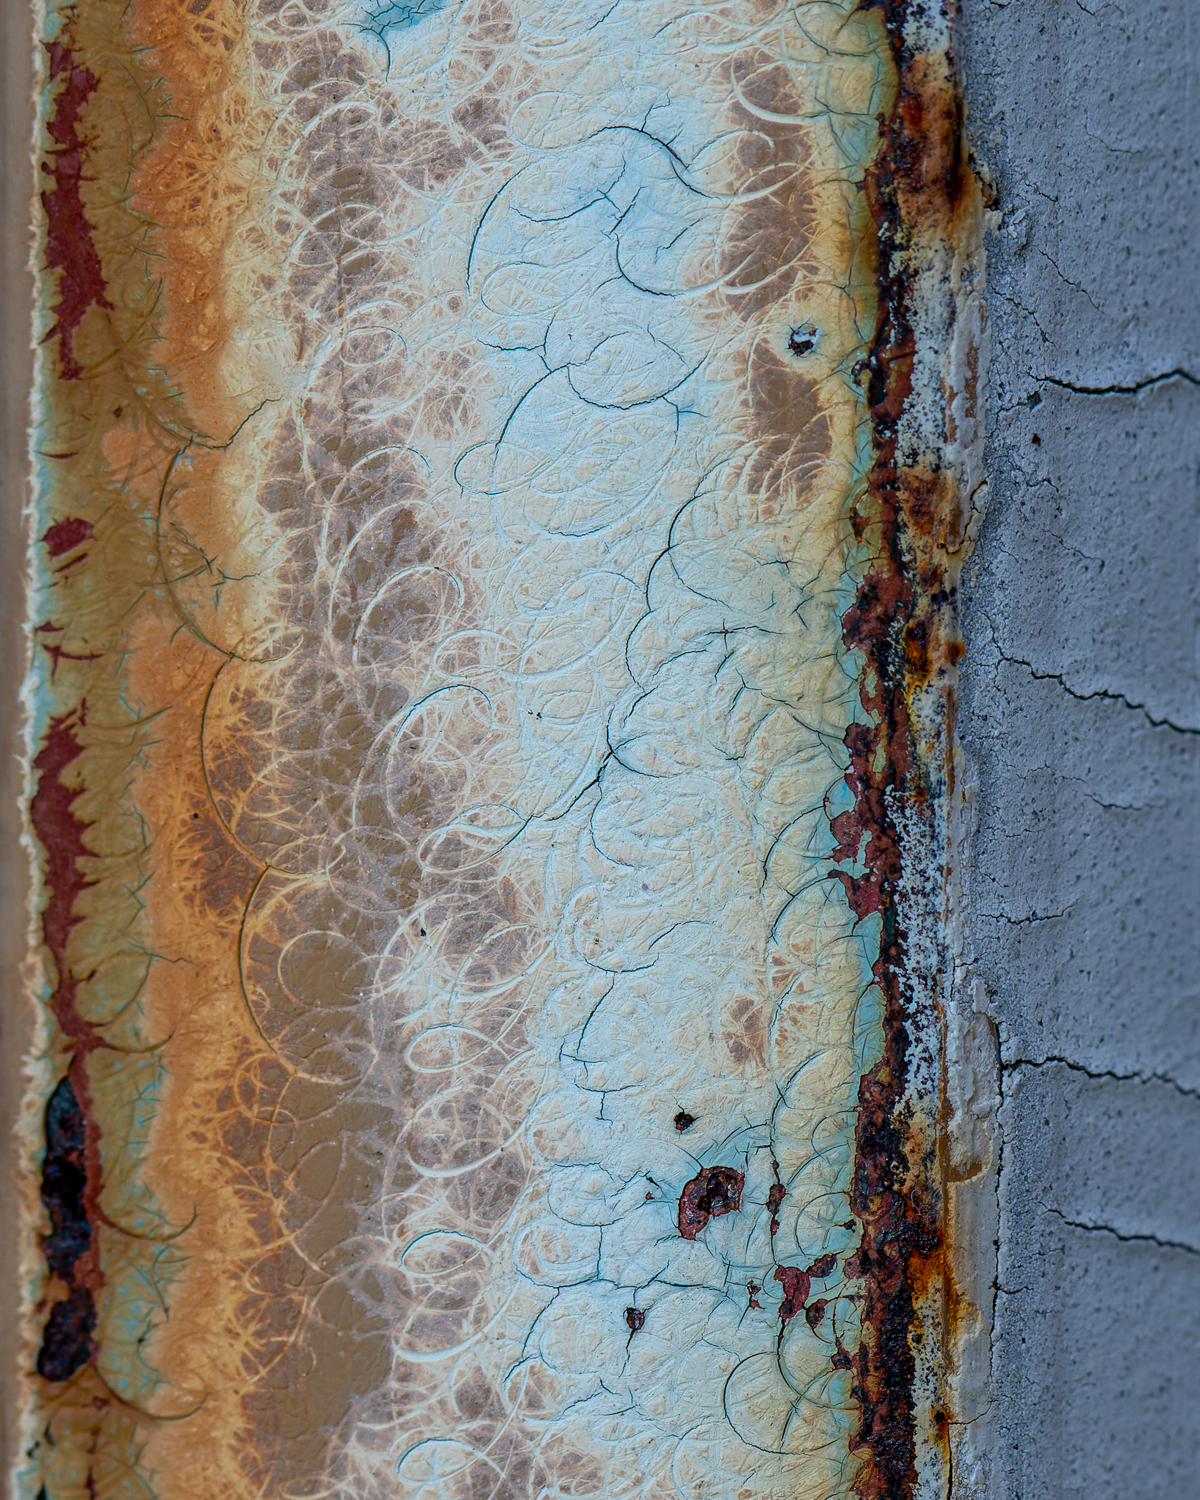 A close-up image of a rusty white window frame